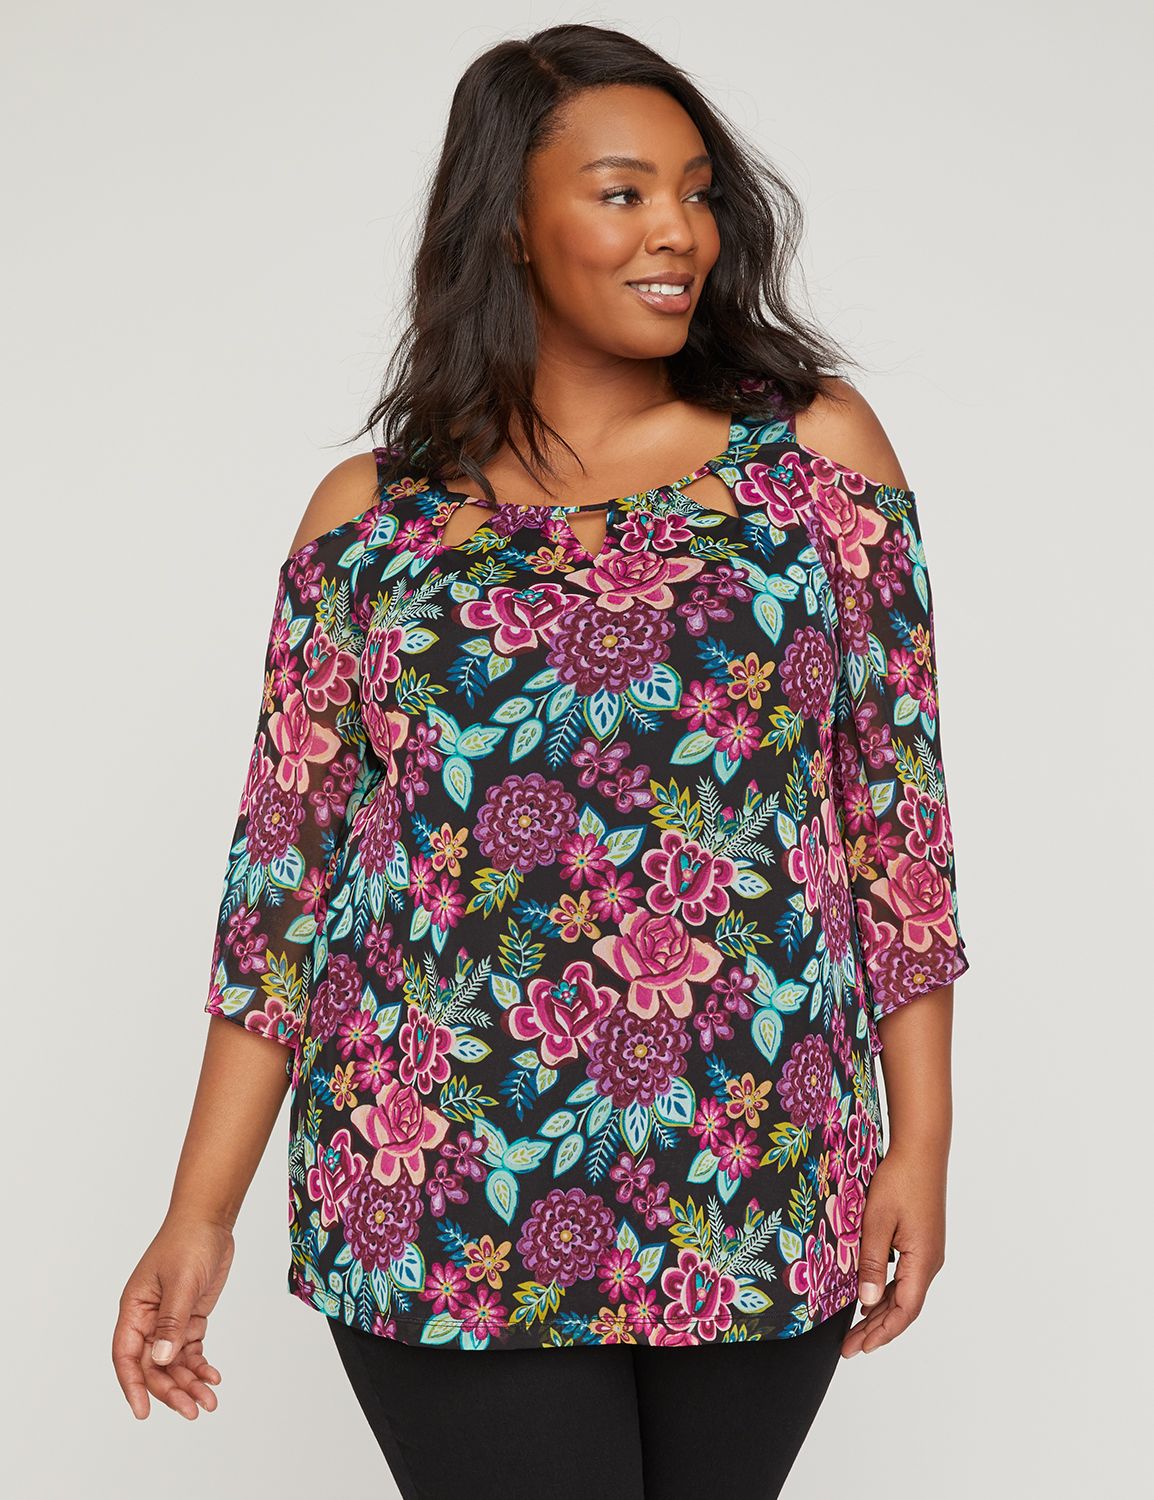 A cold-shoulder top with a feminine, sheer overlay creating a soft, whimsical design. Cutout details along the scoop neck. Covered elastic along back neckline. Lined body. Three-quarter, sheer sleeves with slits at cuffs. Item Number #315082, 100% Polyester, Machine Wash, Imported Plus Size Top, Length: 30", Petite Length: 28" , Plus Sizes 0X-5X, Petite Plus Sizes 0XWP-3XWP, Catherines Plus Sizes